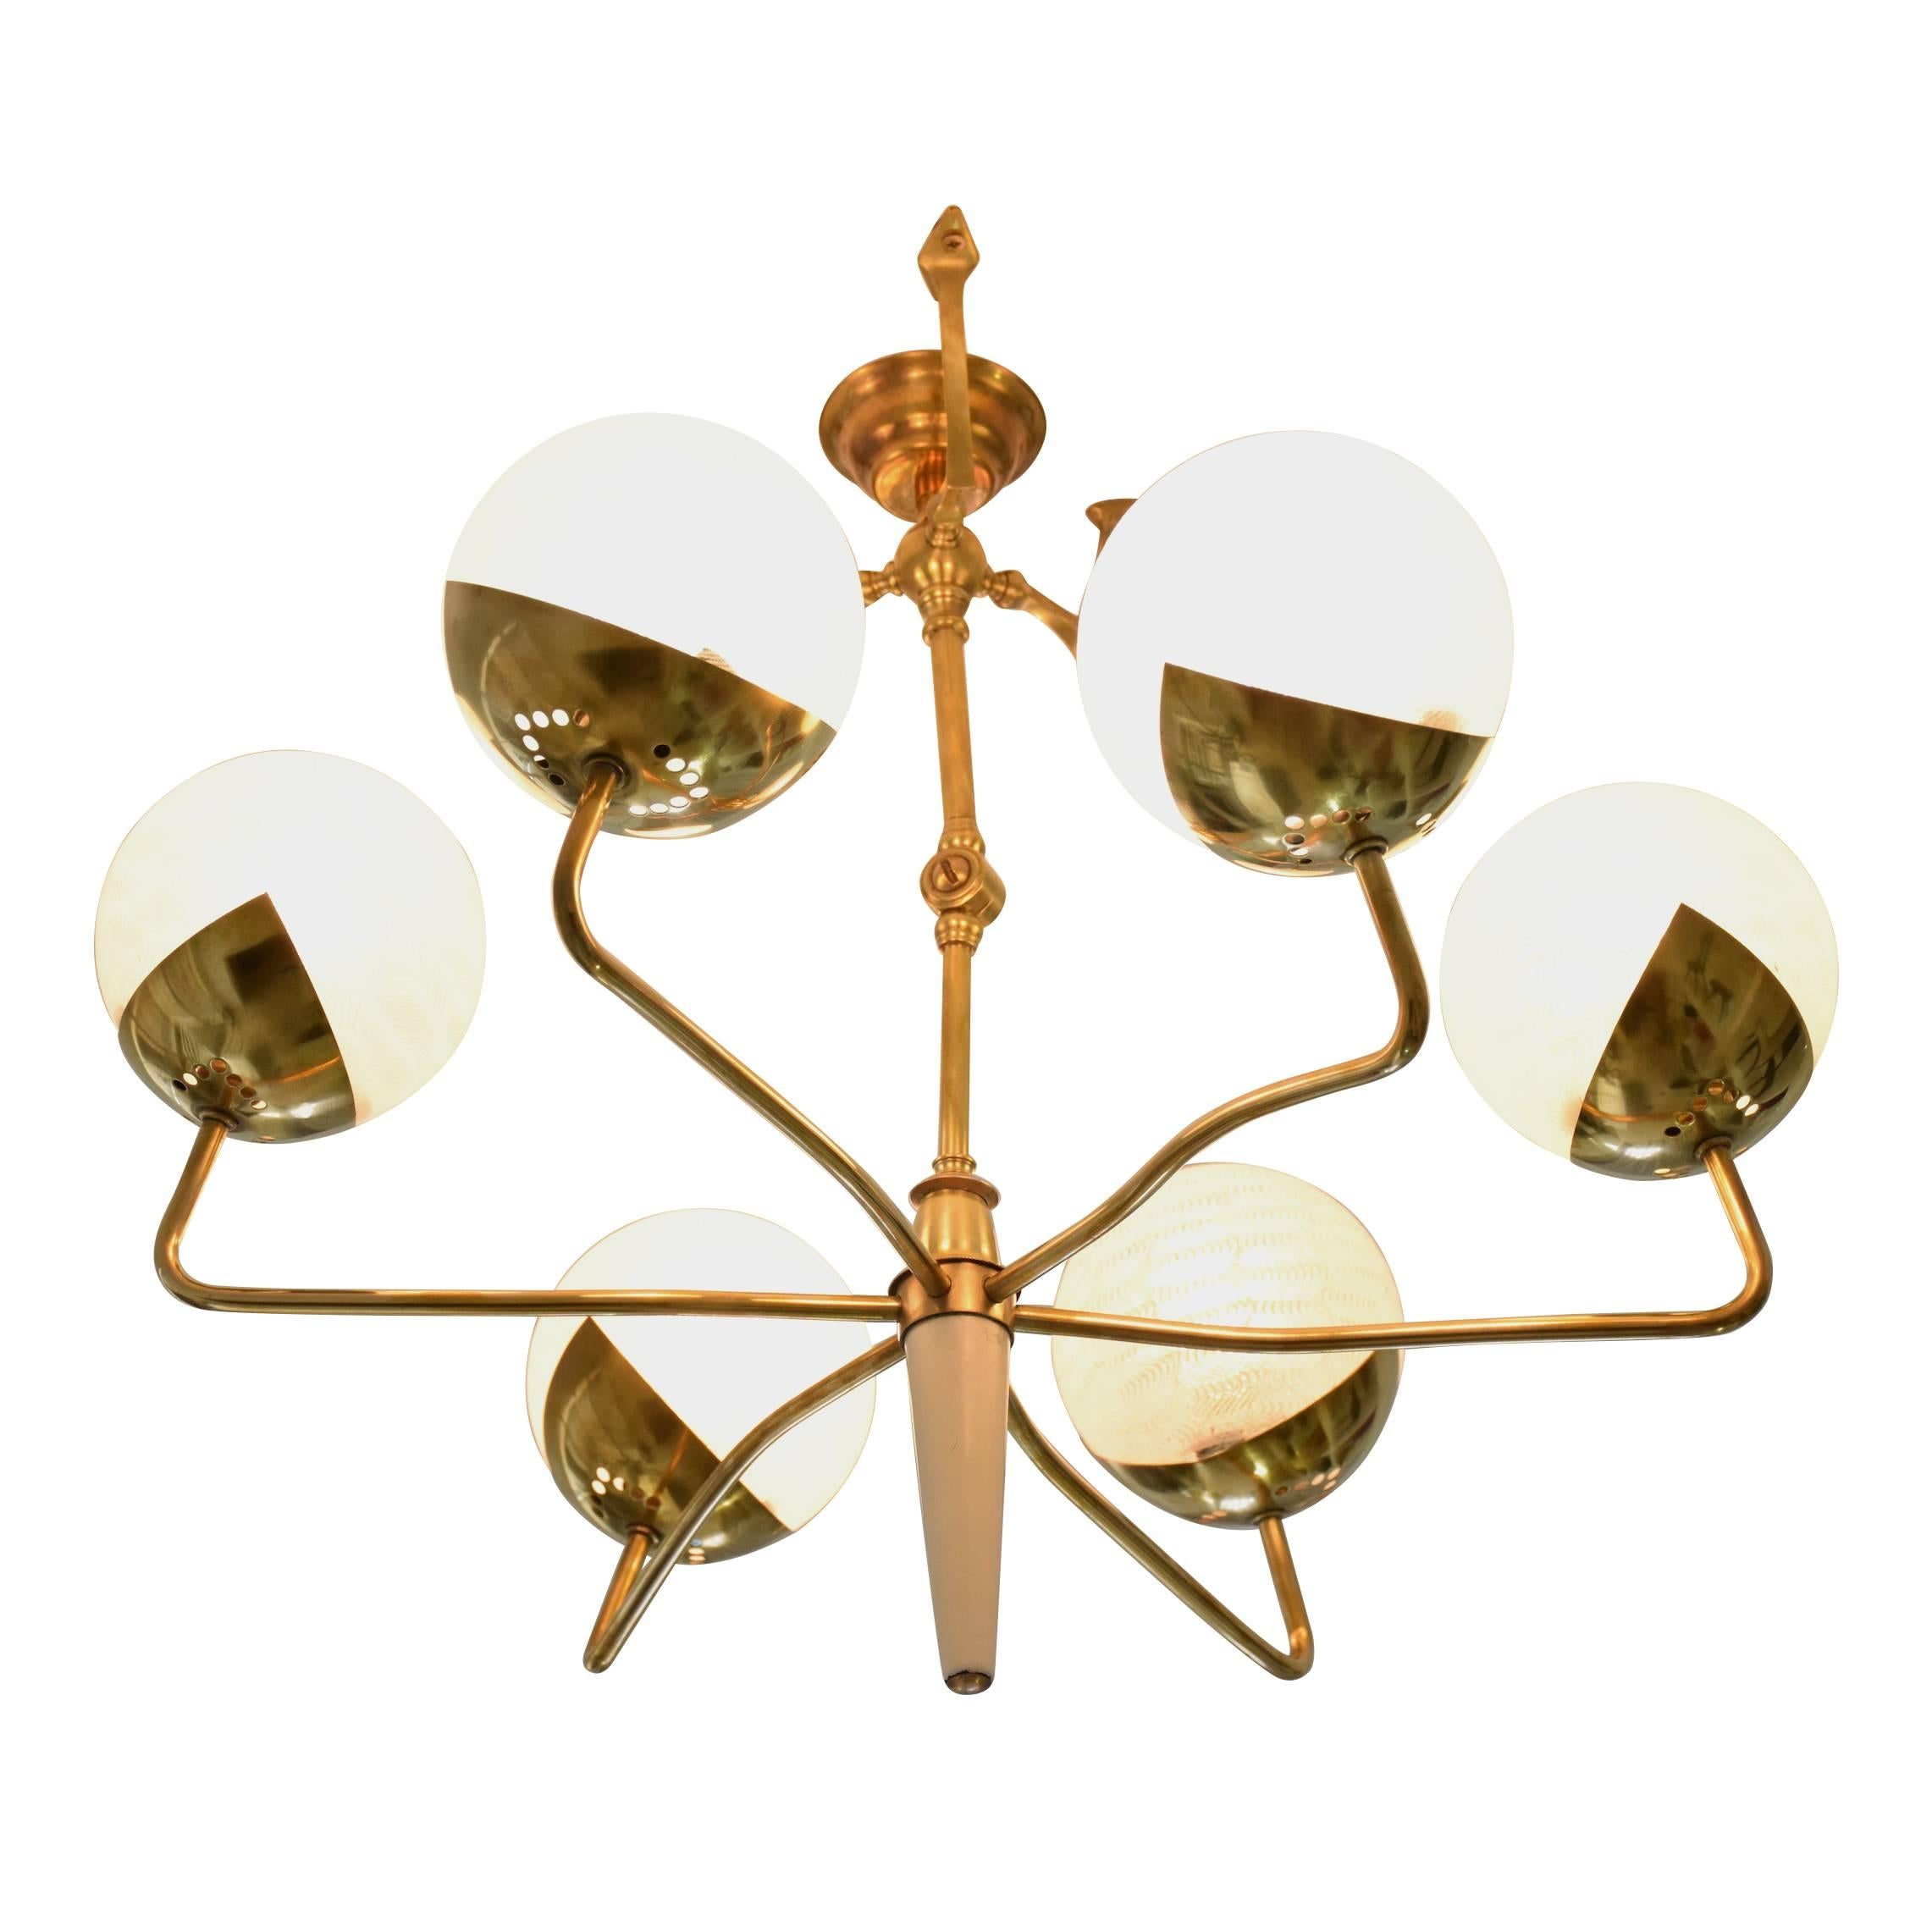 A six-arm 20th midcentury vintage chandelier or flush mount composed of an articulating spider-like gold polished brass structure with feet shaped stems and embellished details throughout. The cone-shaped ending is composed of lacquered brass. The